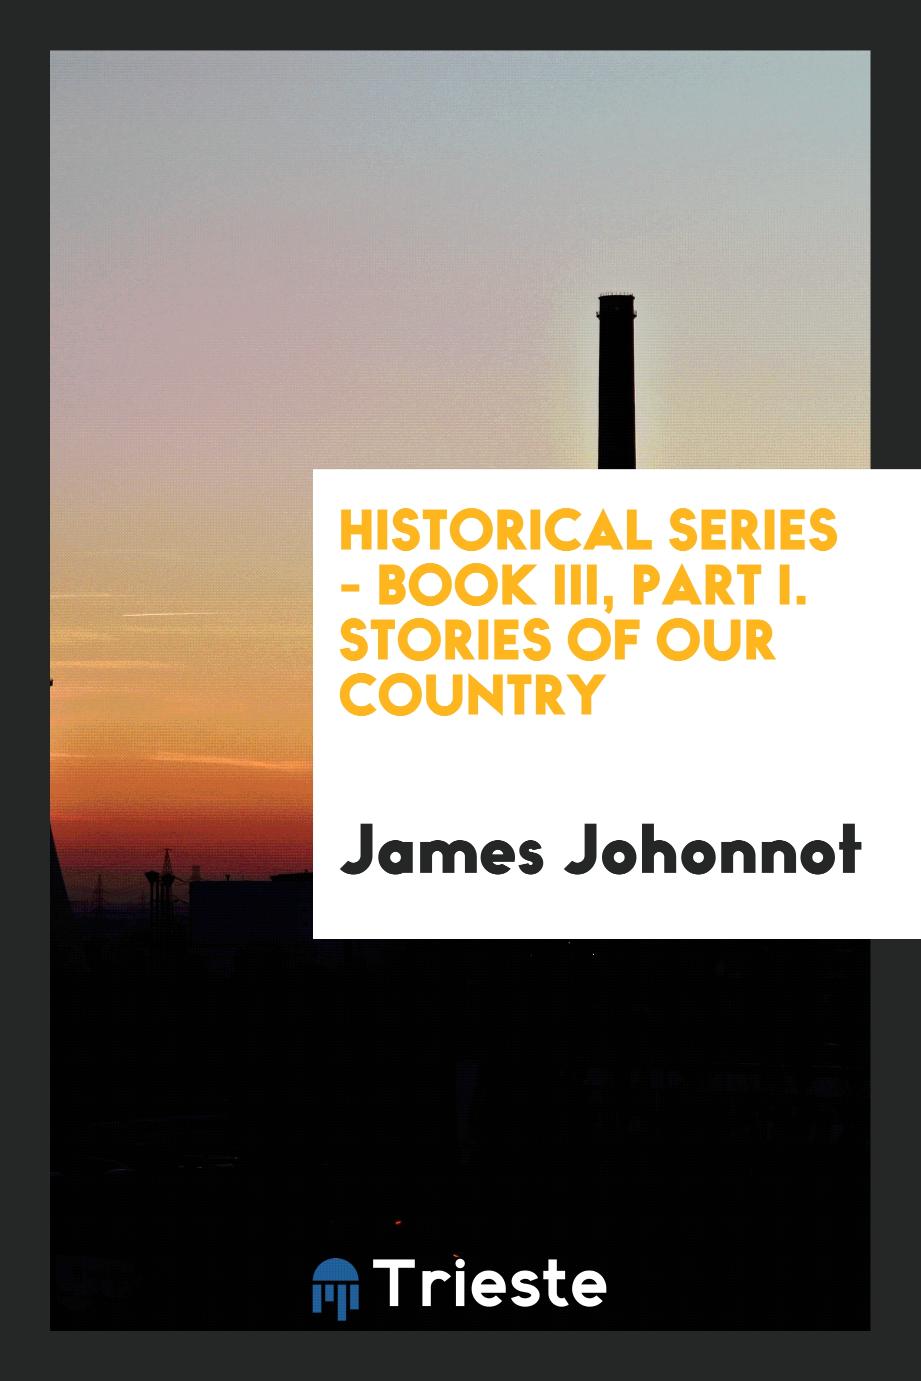 Historical Series - Book III, Part I. Stories of our country